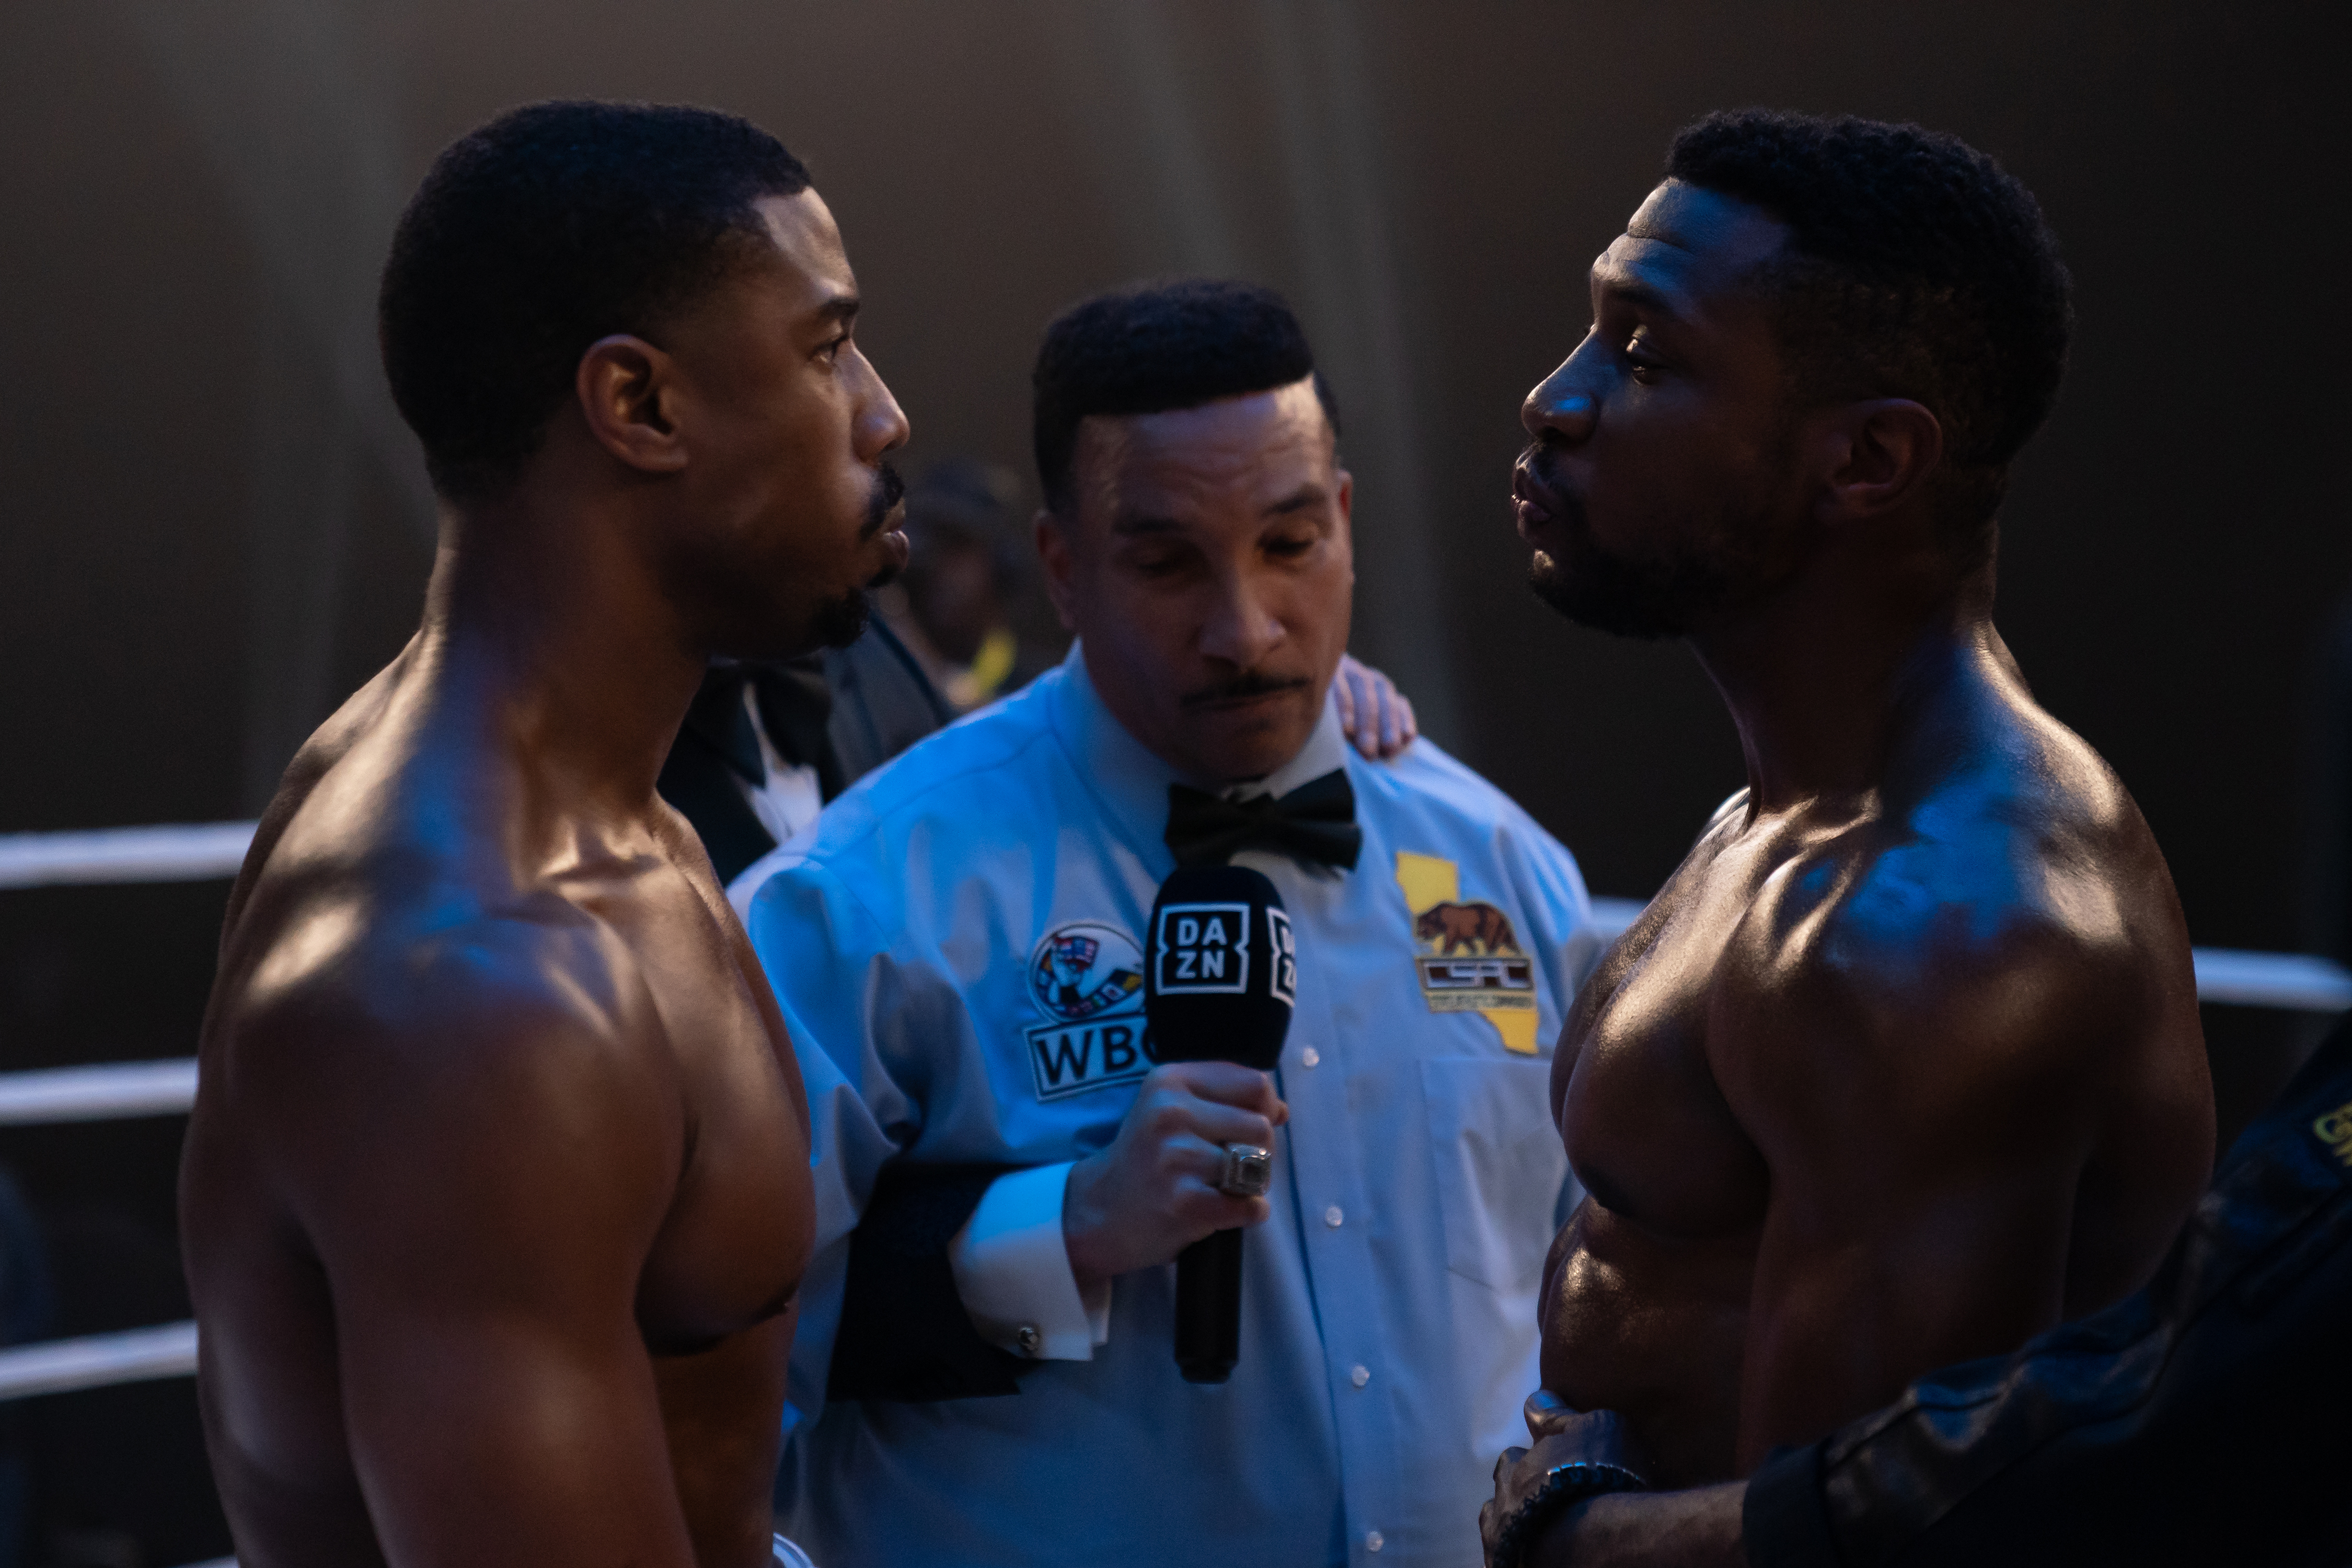 C3_19200_RC
Michael B. Jordan stars as Adonis Creed and Jonathan Majors as Damian Anderson in
CREED III 
A Metro Goldwyn Mayer Pictures film
Photo credit: Eli Ade
© 2022 Metro-Goldwyn-Mayer Pictures Inc. All Rights Reserved.
